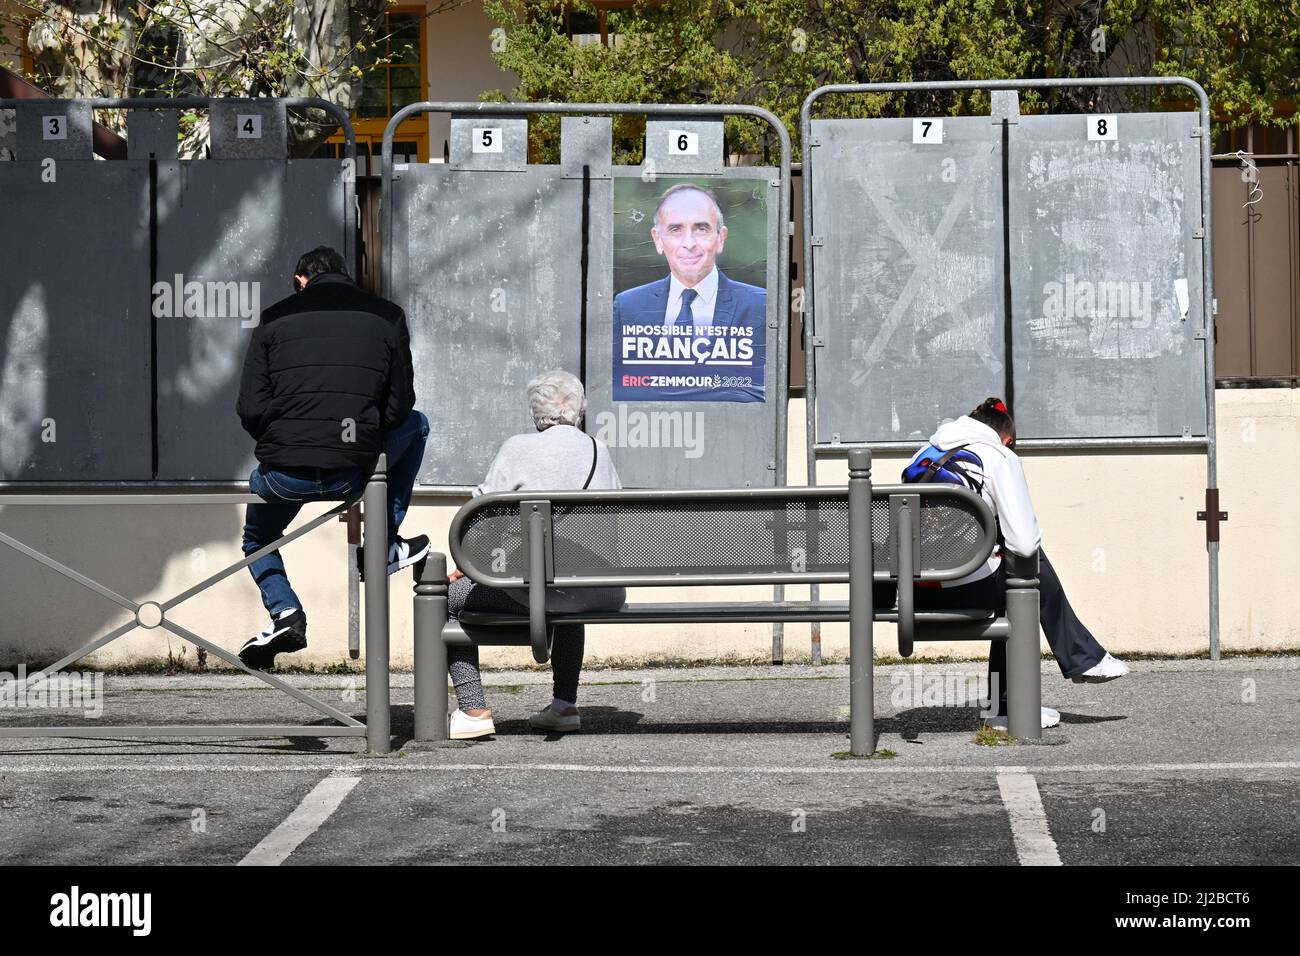 Posters for Presidential candidates are seen in Cannes, France on March 31, 2022. (Photo by Lionel Urman/Sipa USA) Stock Photo